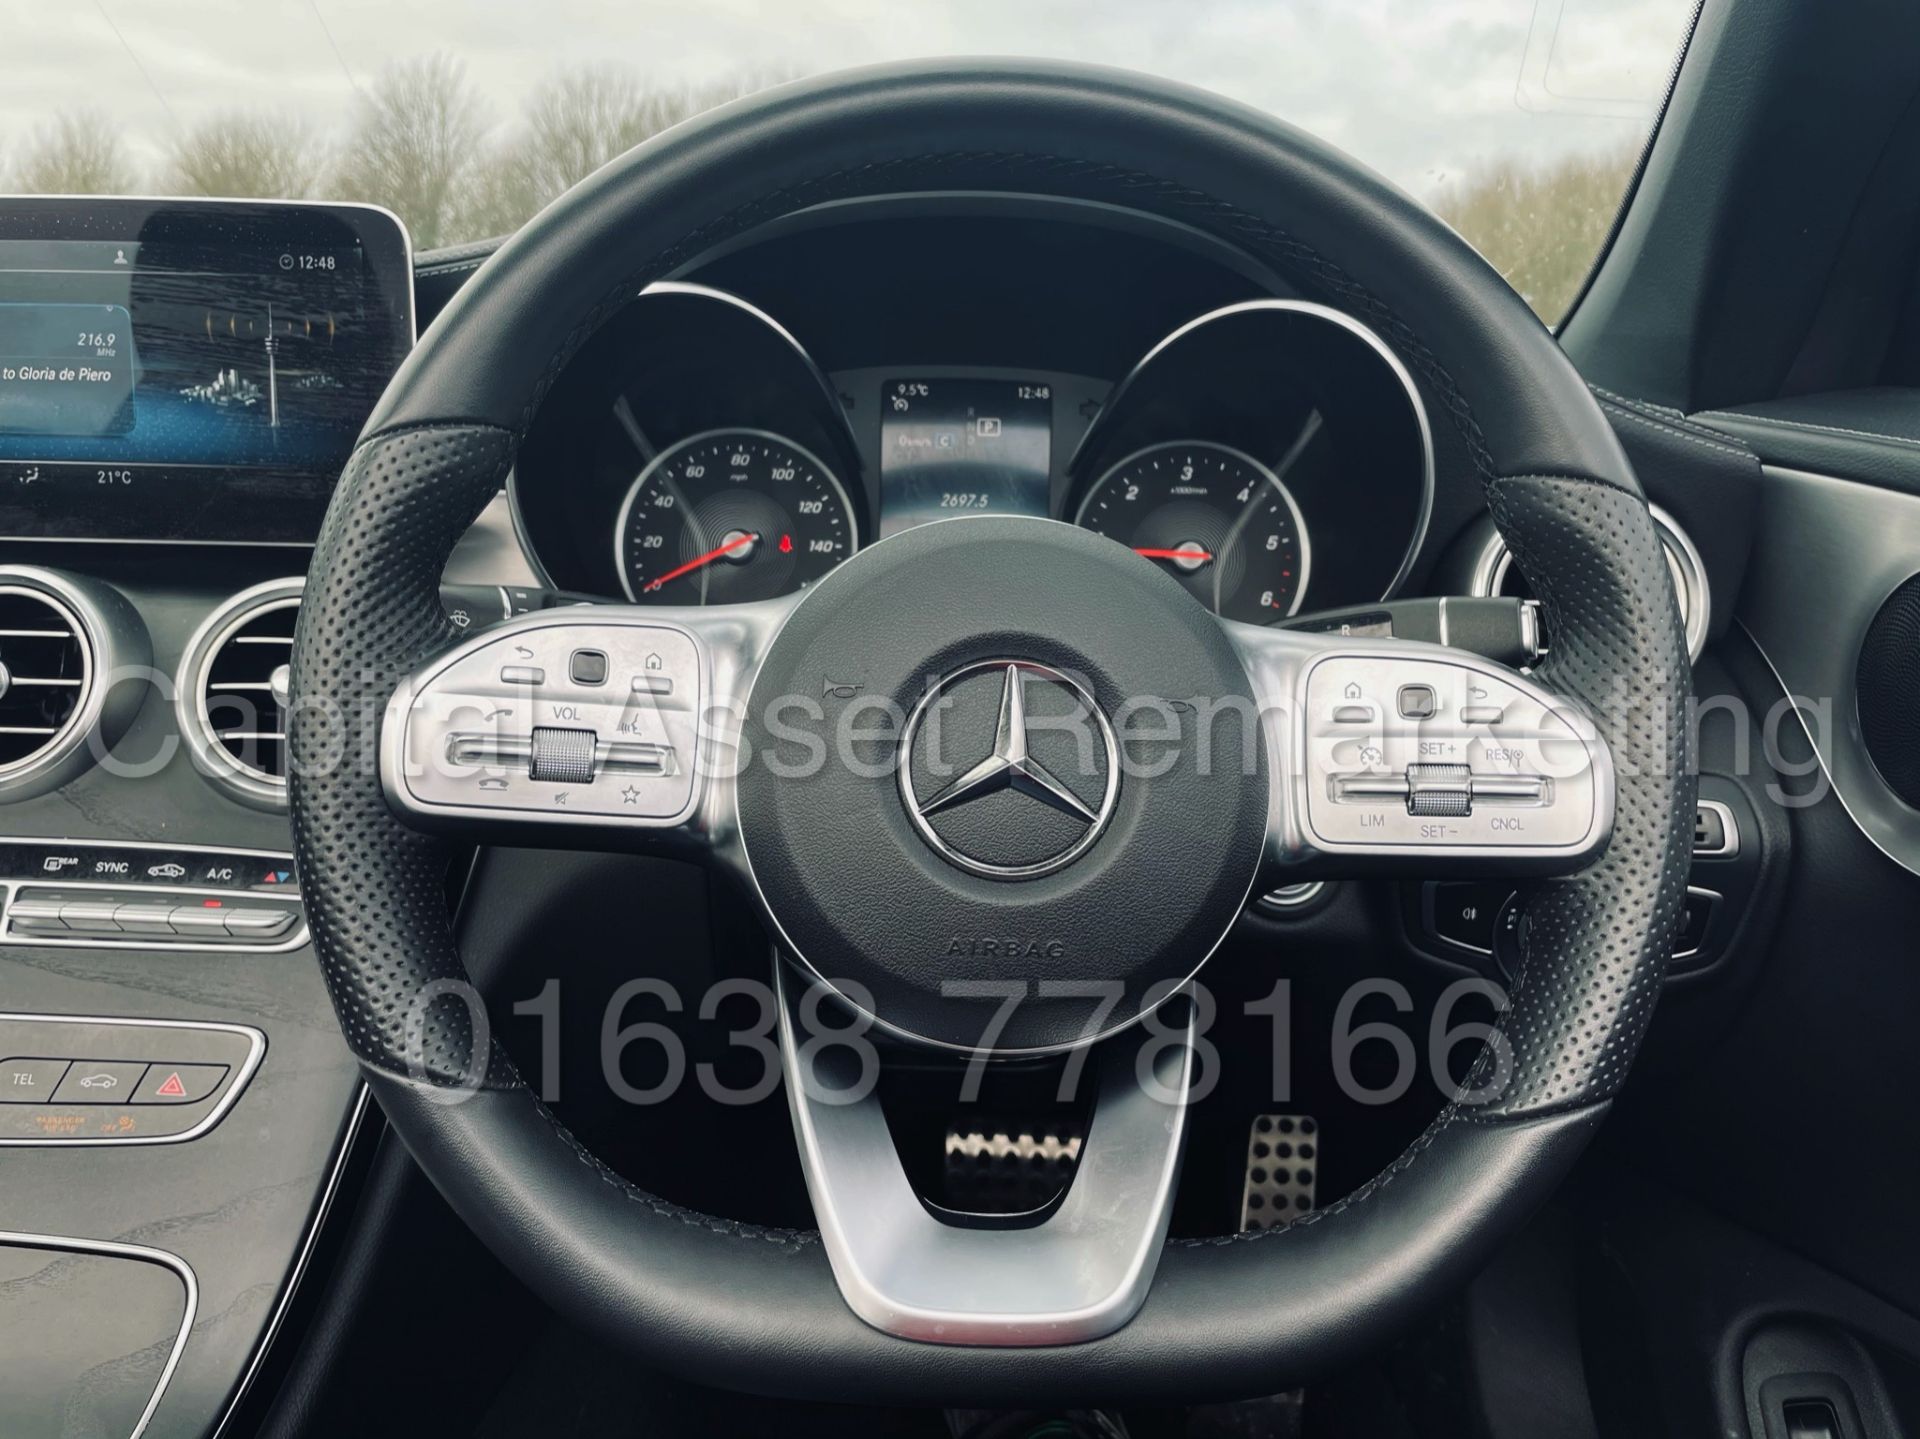 (ON SALE) MERCEDES-BENZ C220D *AMG LINE - CABRIOLET* (2019) '9G TRONIC AUTO - LEATHER - SAT NAV' - Image 54 of 56